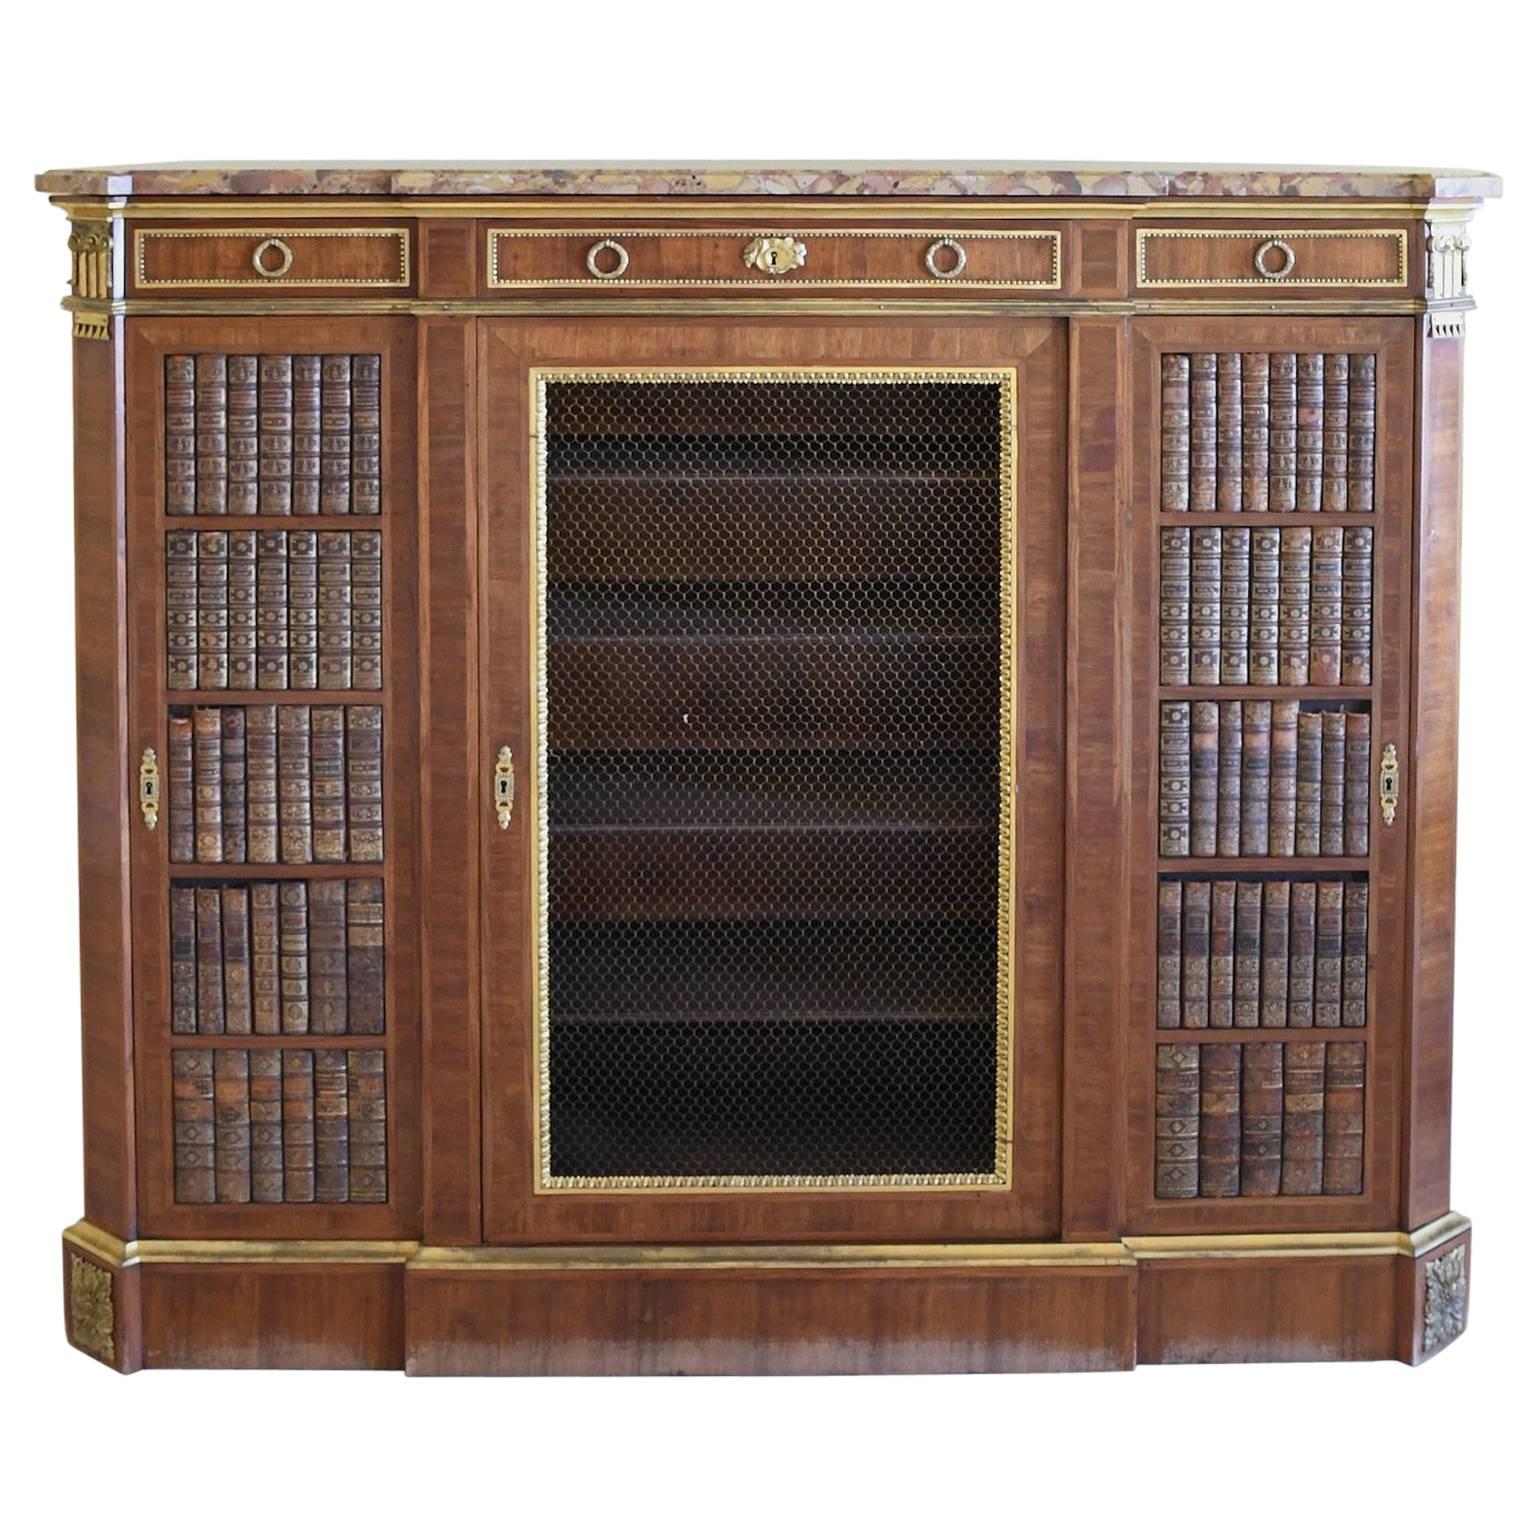 Napoleon III Cabinet in Walnut with Ormolu in Louis XVI Style, France, c. 1850 For Sale